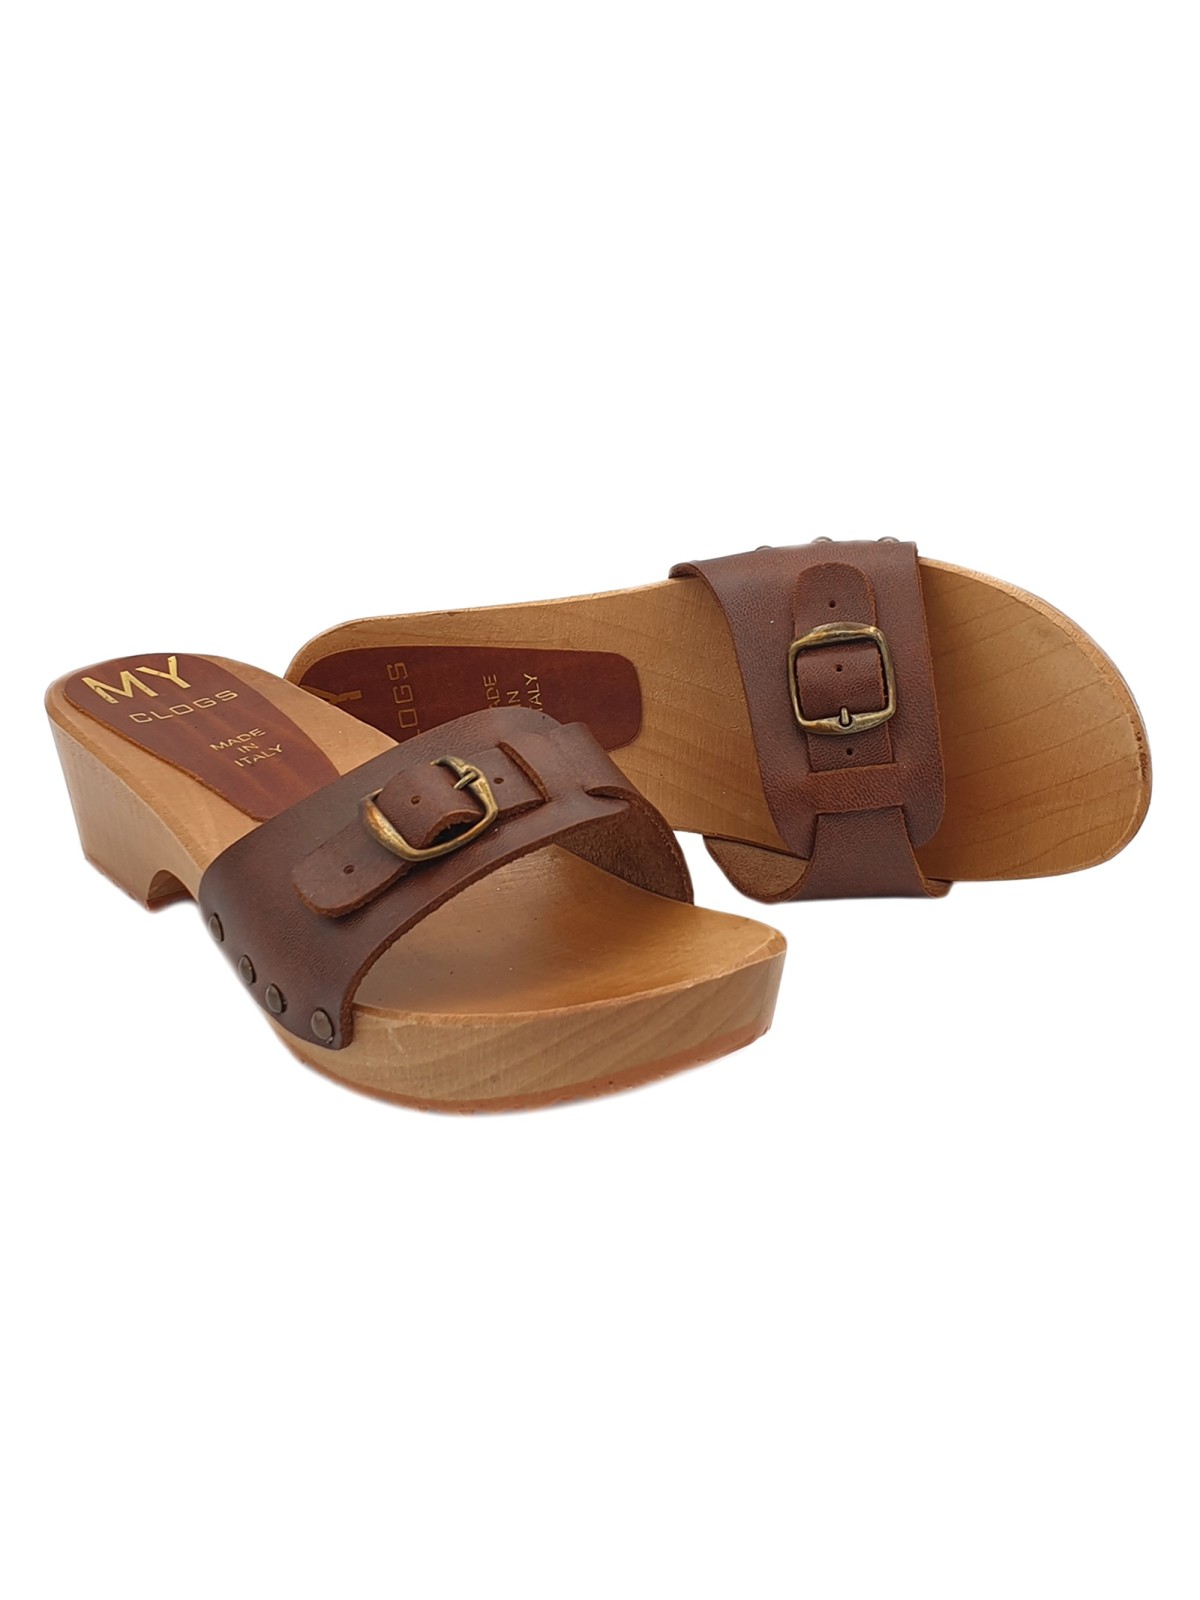 BROWN LEATHER SWEDISH CLOGS IN WOOD